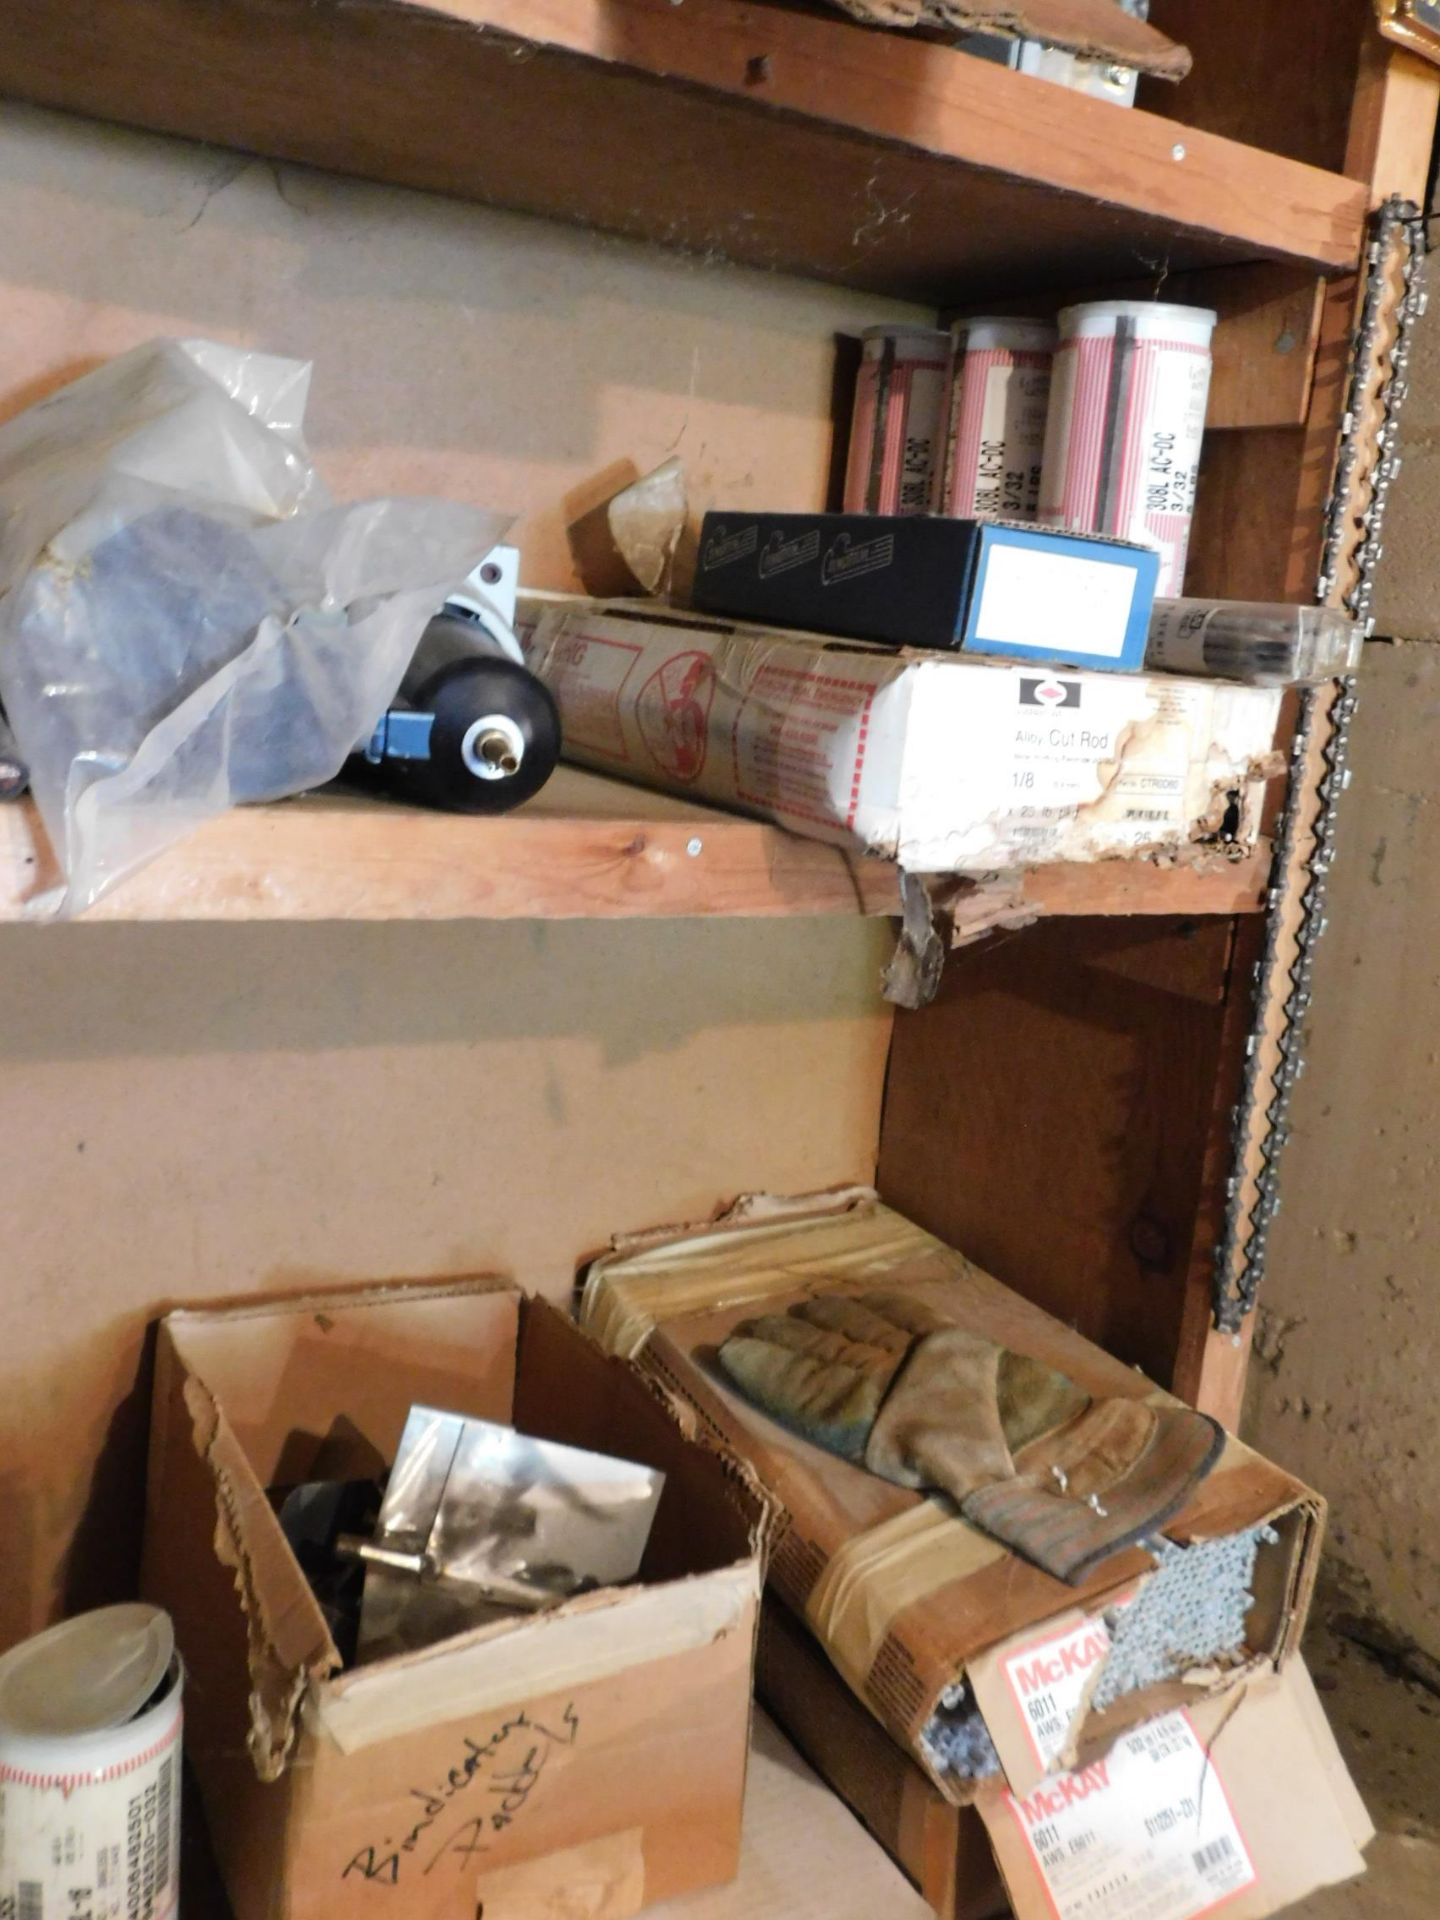 Contents of Wood Shelving, Welding Supplies, Filters, Etc. - Image 4 of 4